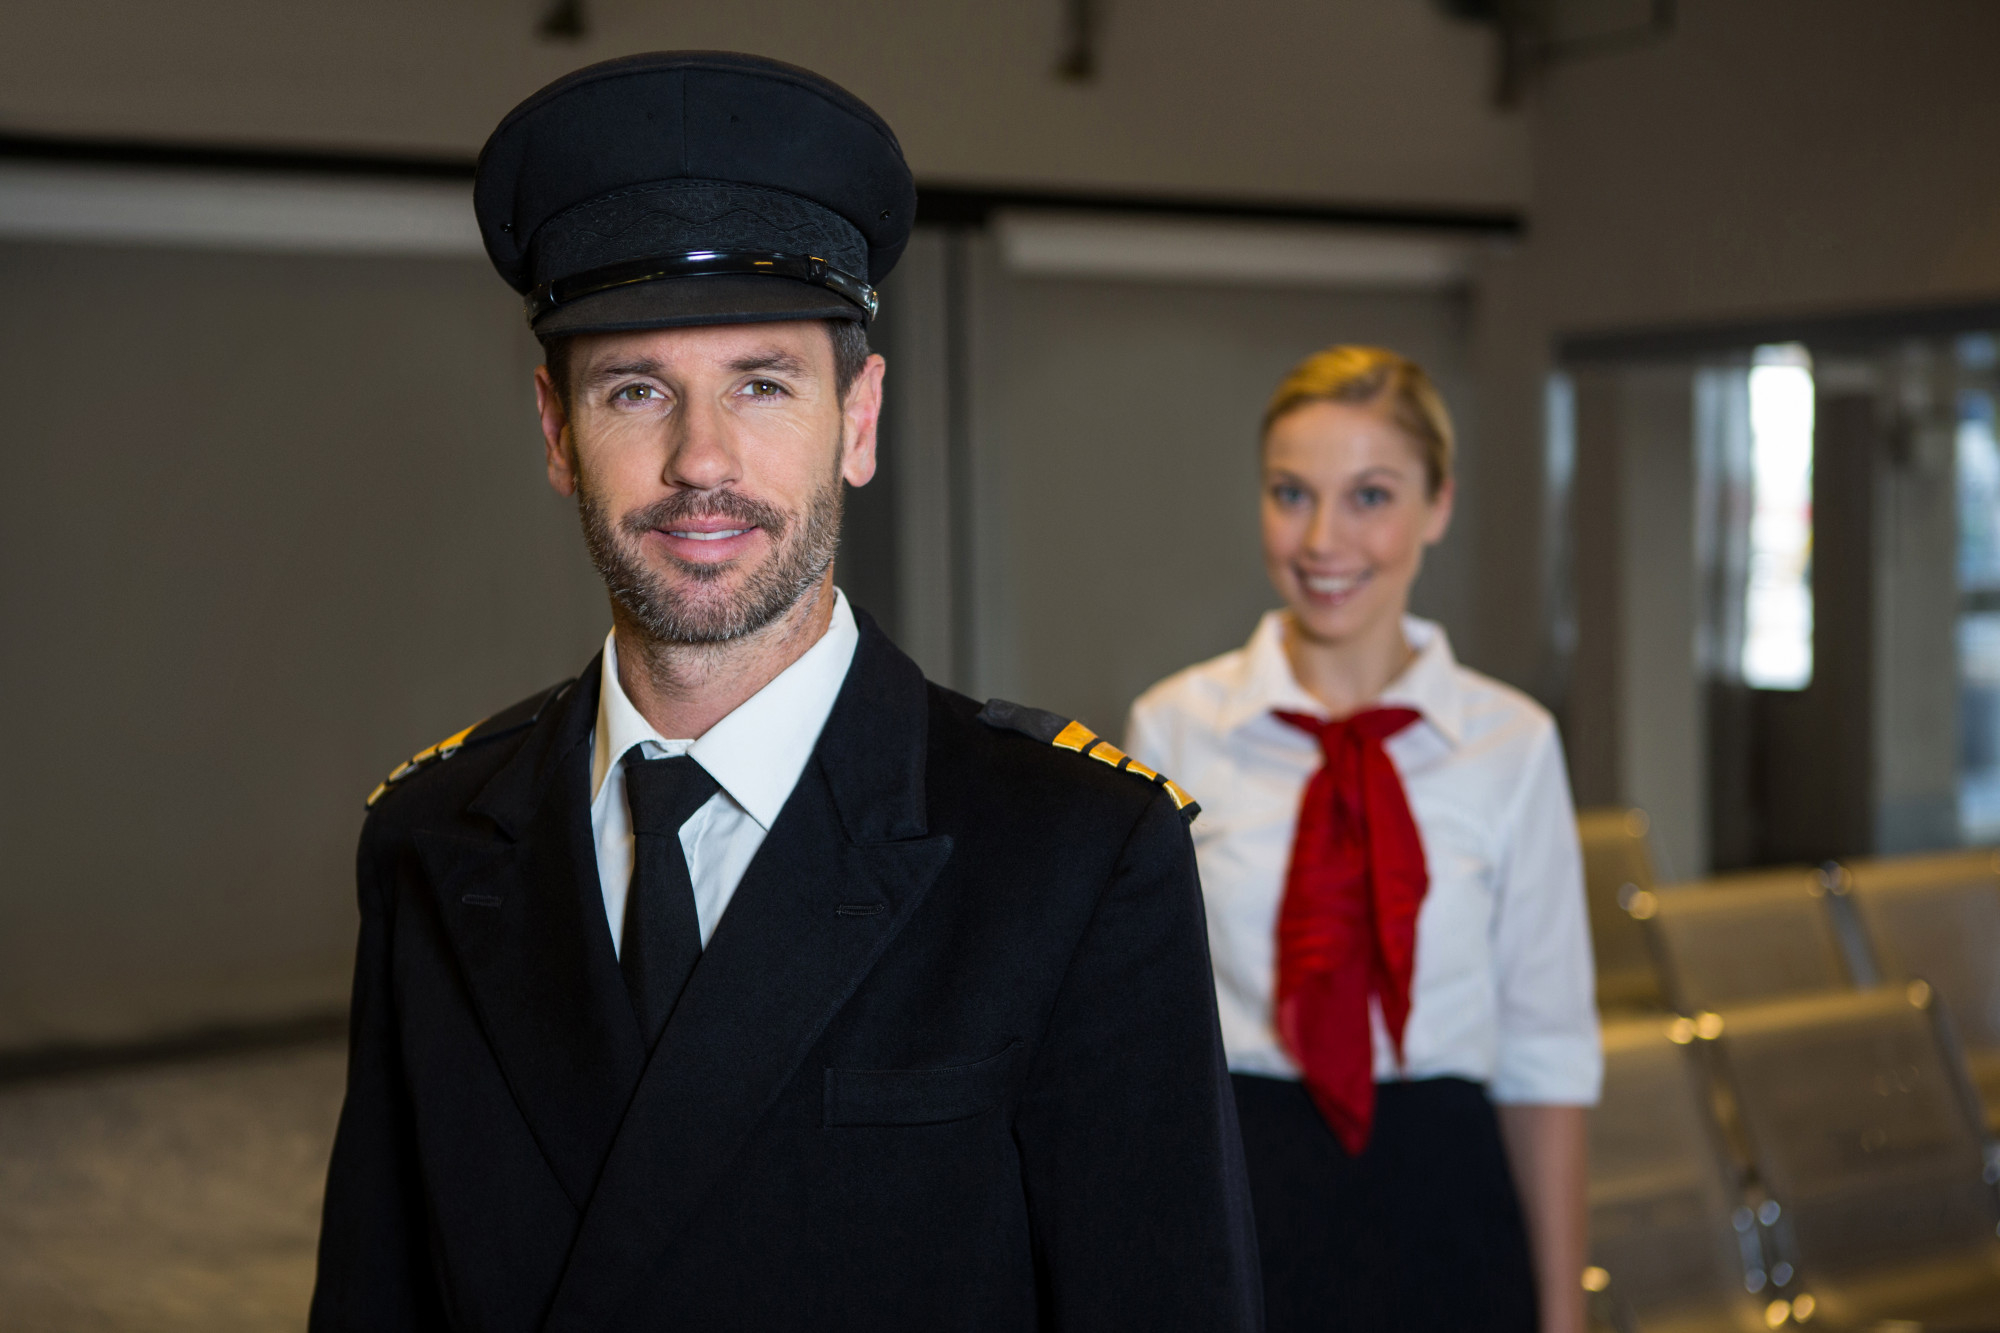 A pilot standing in front of a stewardess | Source: Freepik